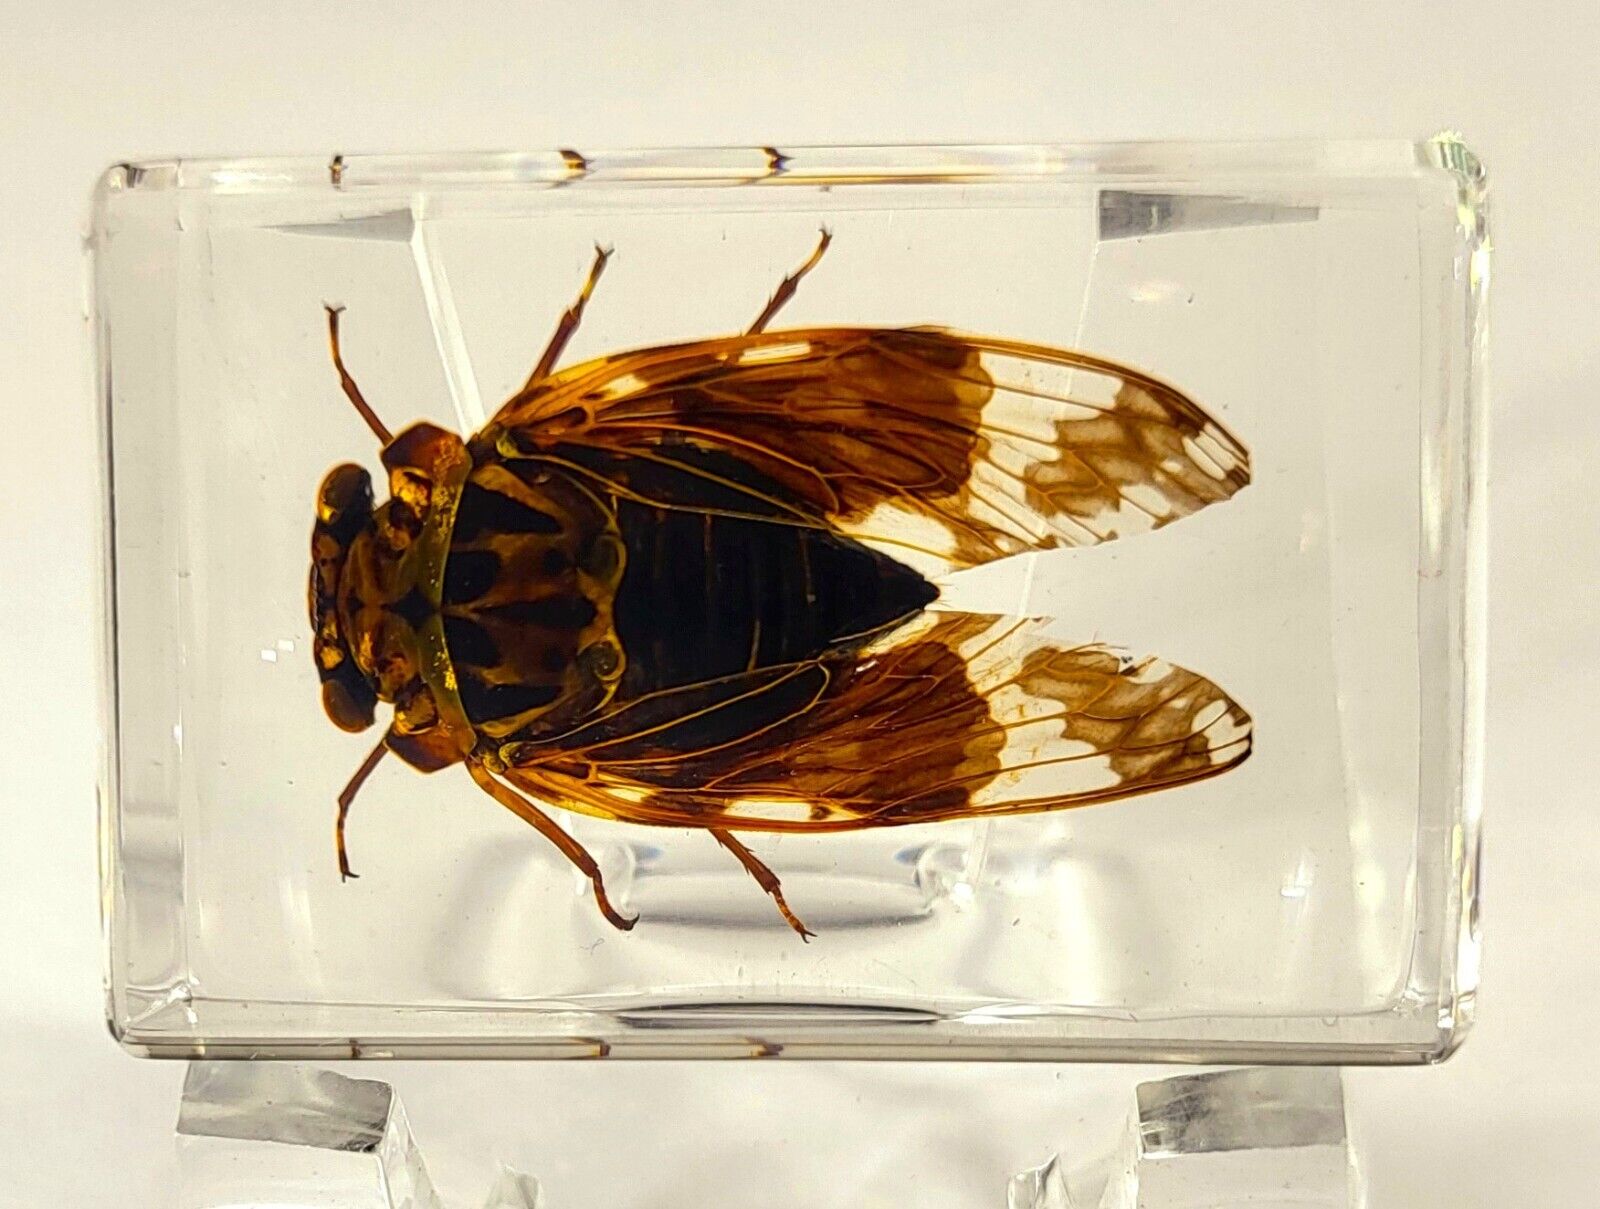 44mm Real Cicada in Clear Lucite Resin Science Education Collection Specimen